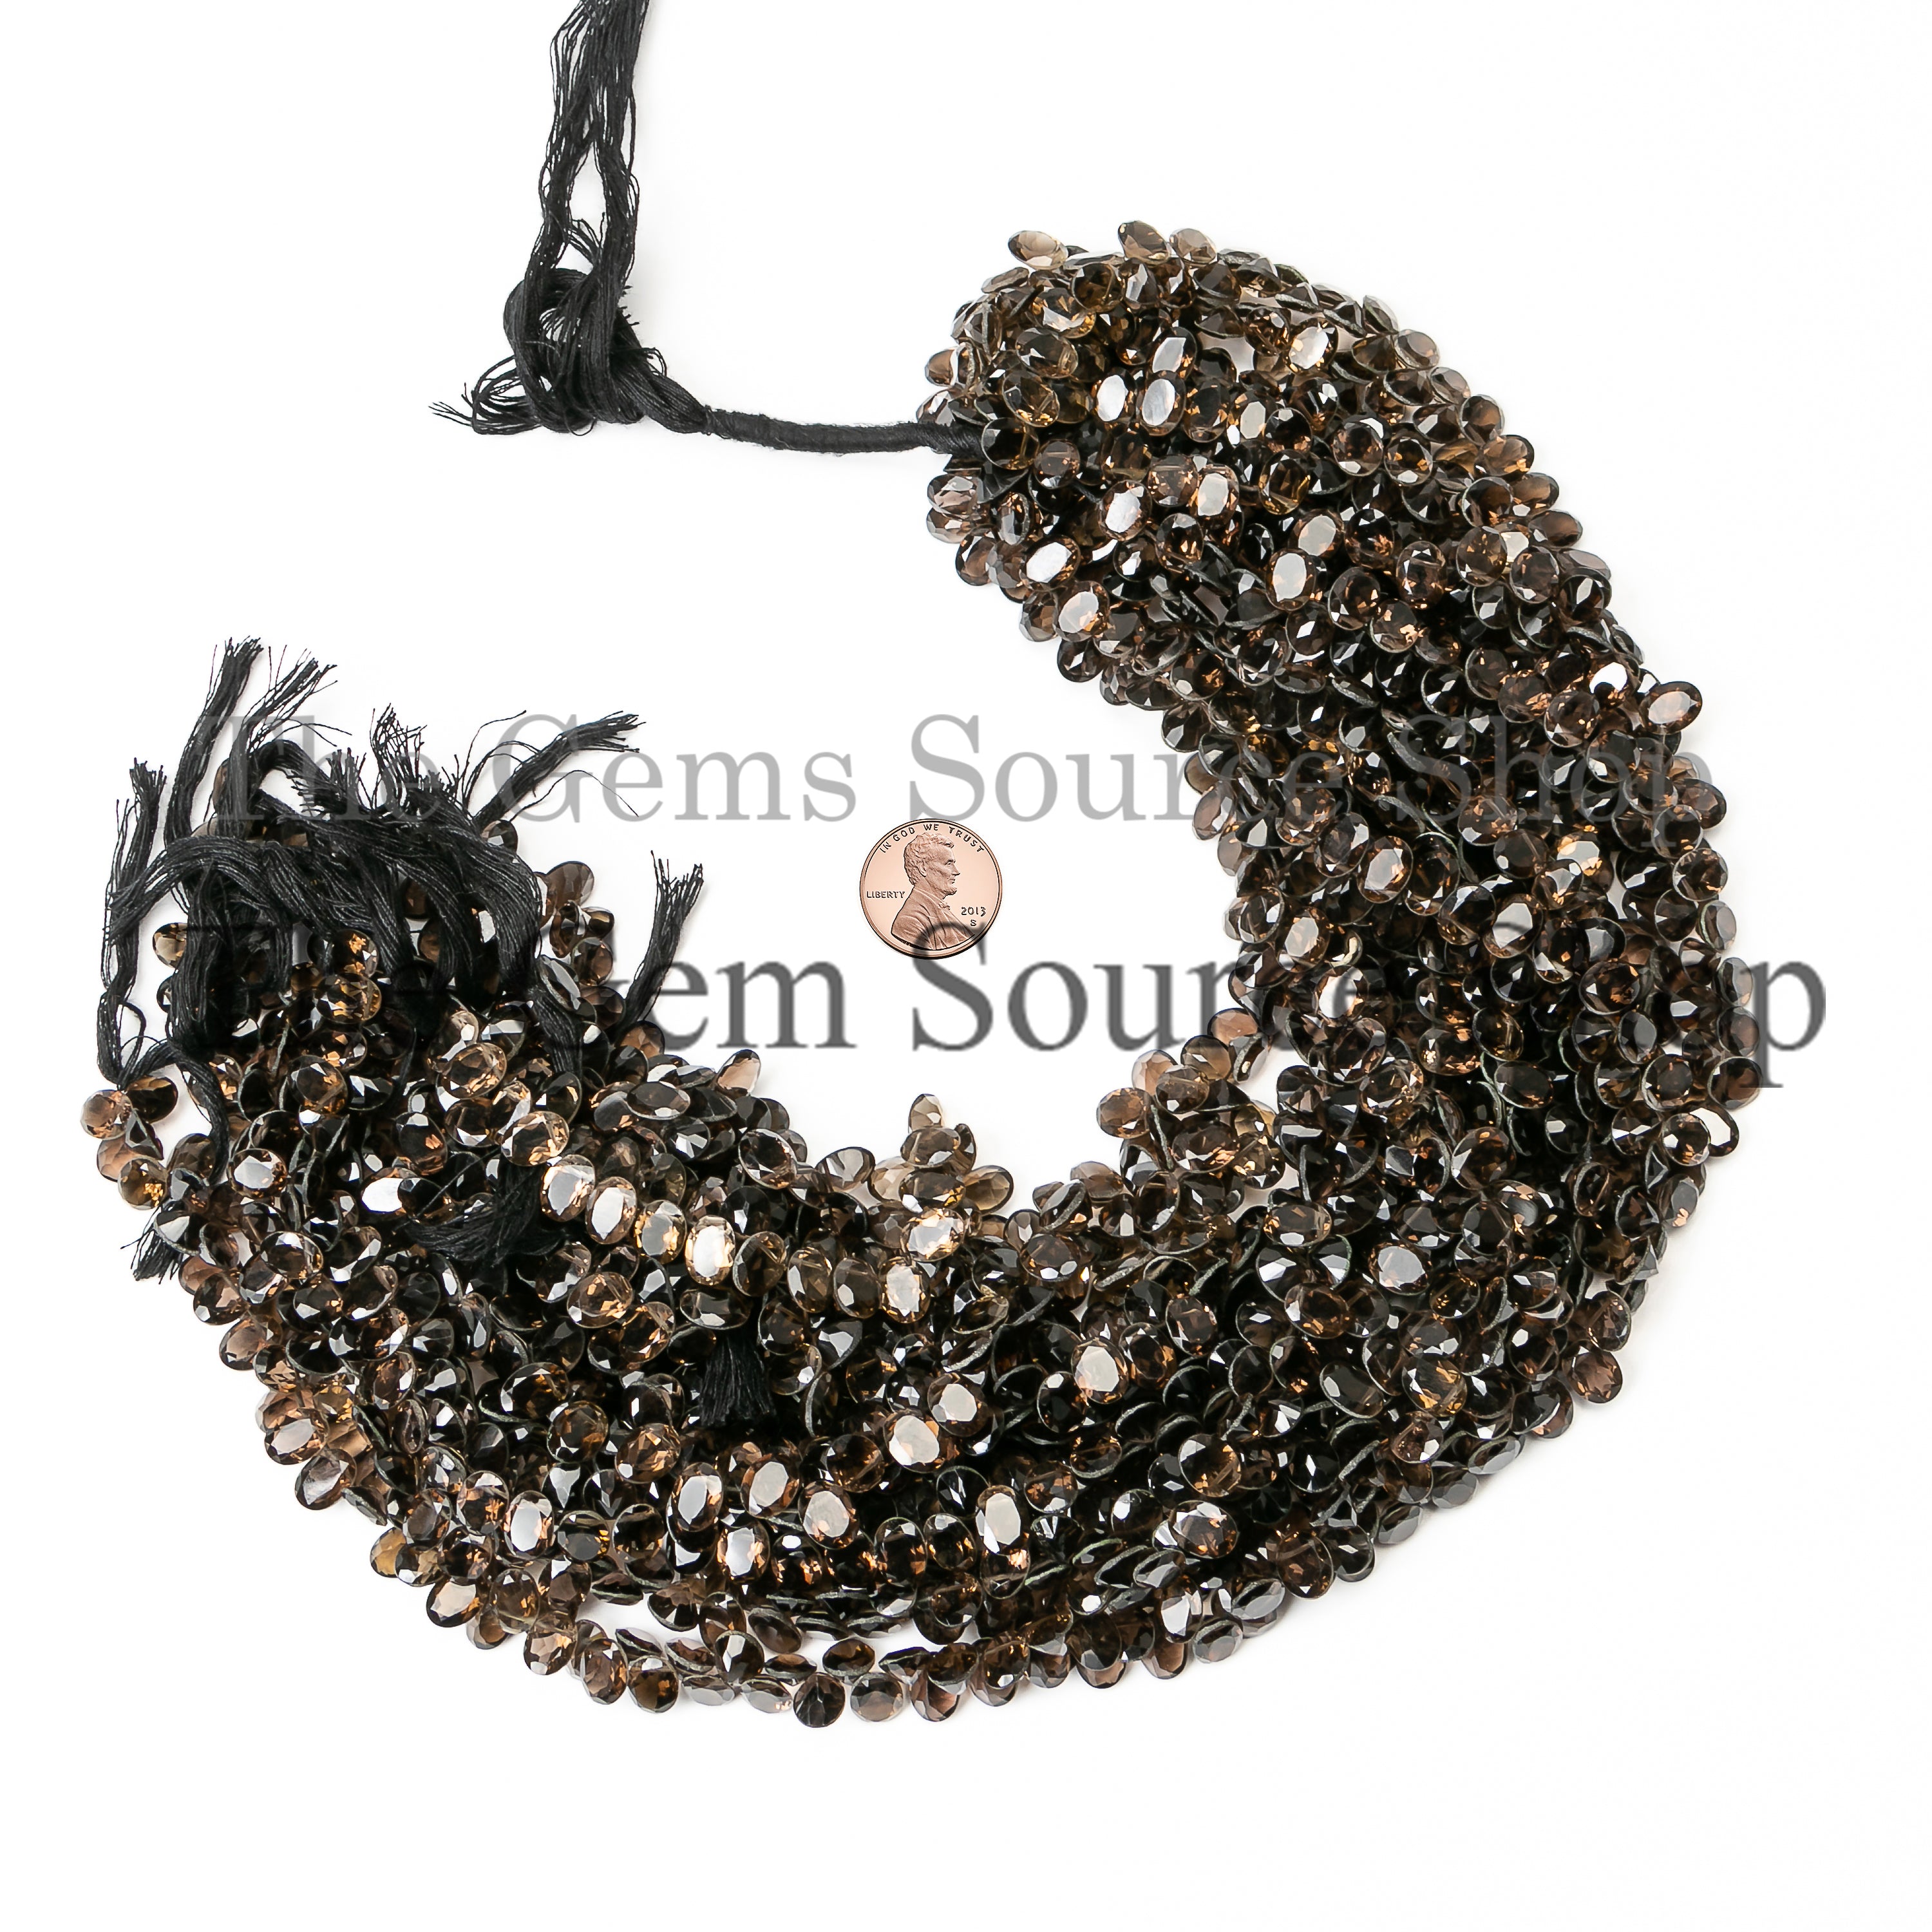 6X8mm Smoky Quartz Faceted Oval Beads, Smoky Quartz Beads, Quartz Briolette Cut Oval Beads, AAA Quality Necklace Beads